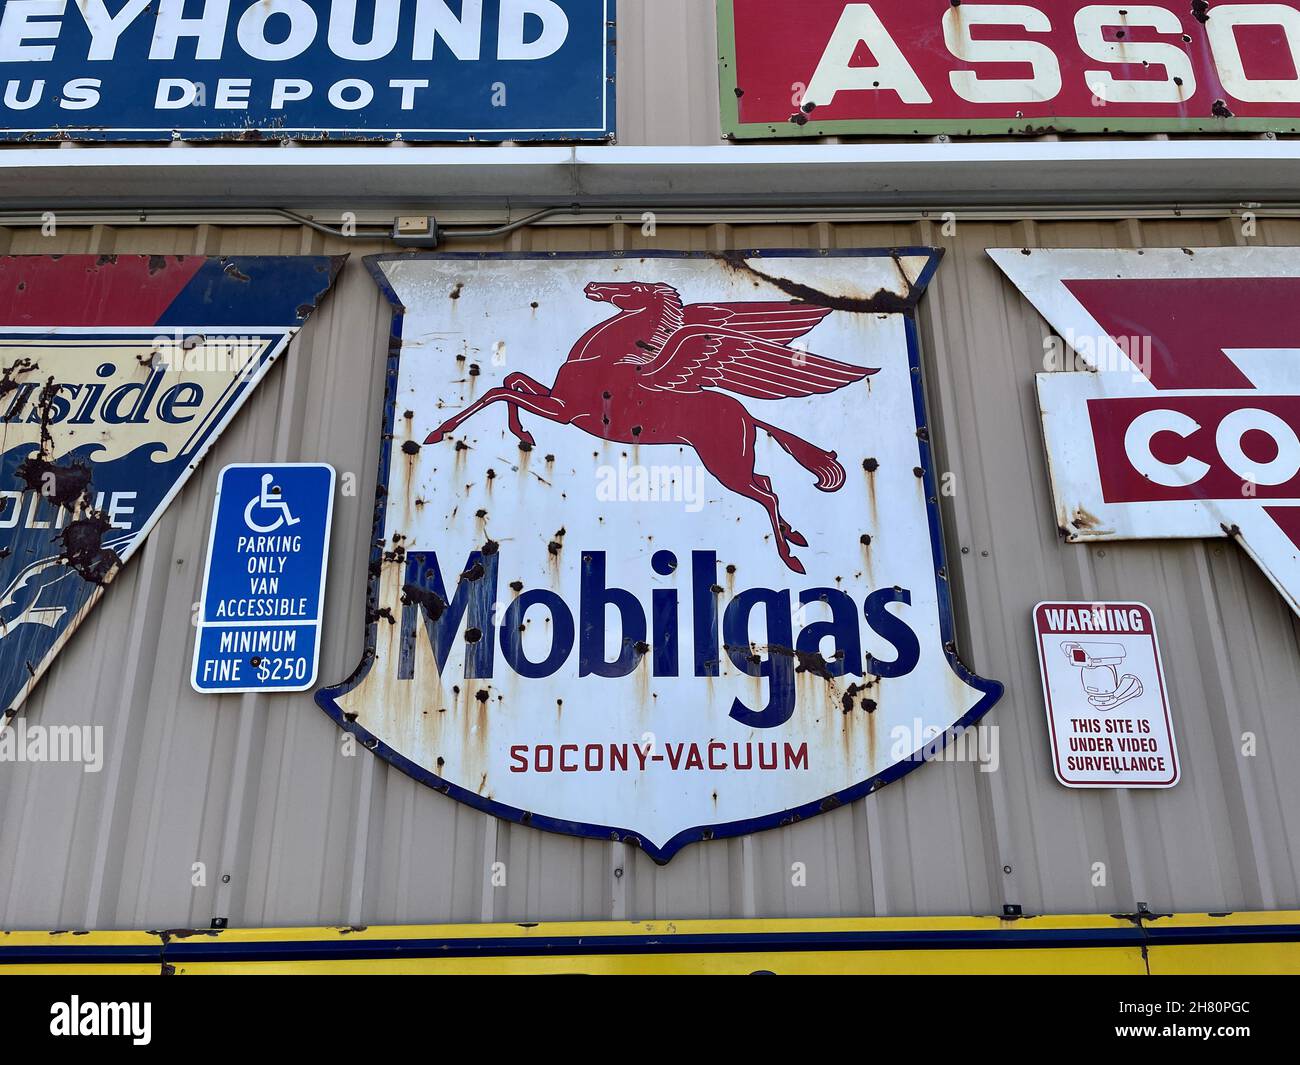 FRESNO, UNITED STATES - Oct 15, 2021: A scenic shot of a vintage large pegasus red horse Mobilgas sign in Fresno Stock Photo